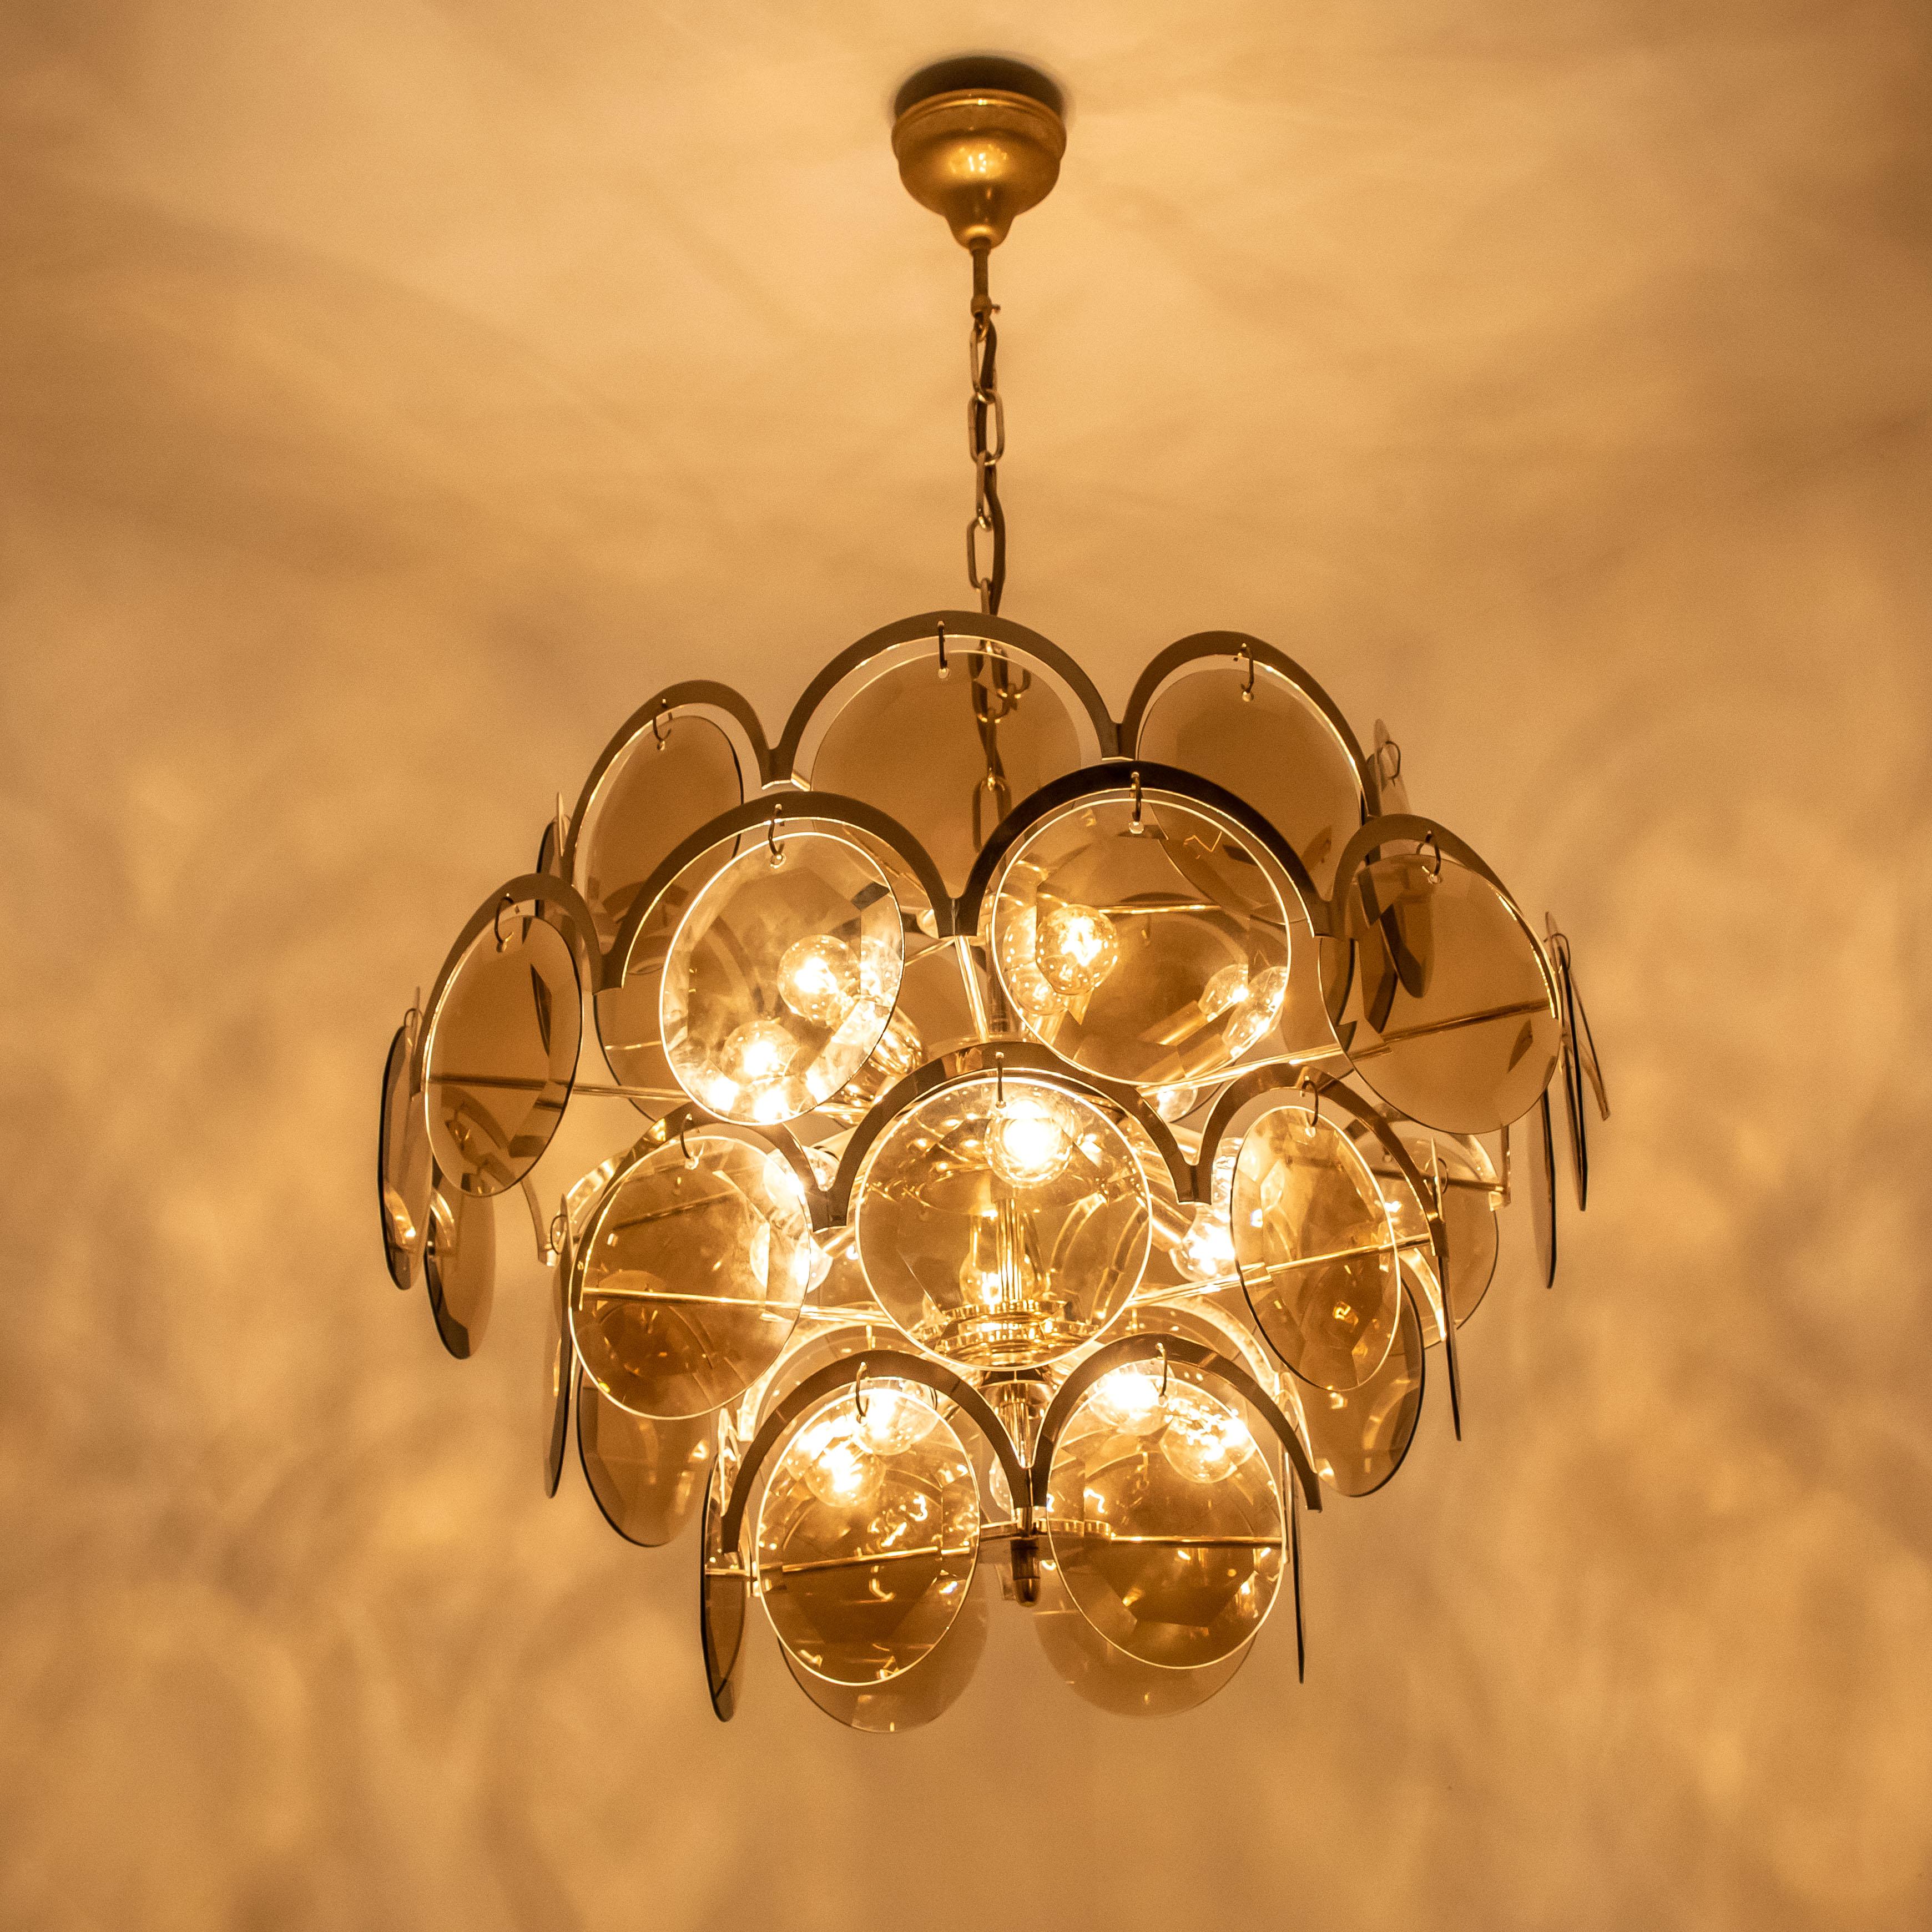 A gorgeous four tiers hanging light fixture, attributed to Vistosi with graduated tiers of smoked round facet chapped glass discs framed by half moon shaped brass. The chandelier is complete - no hook or glass disk is missing, with its original